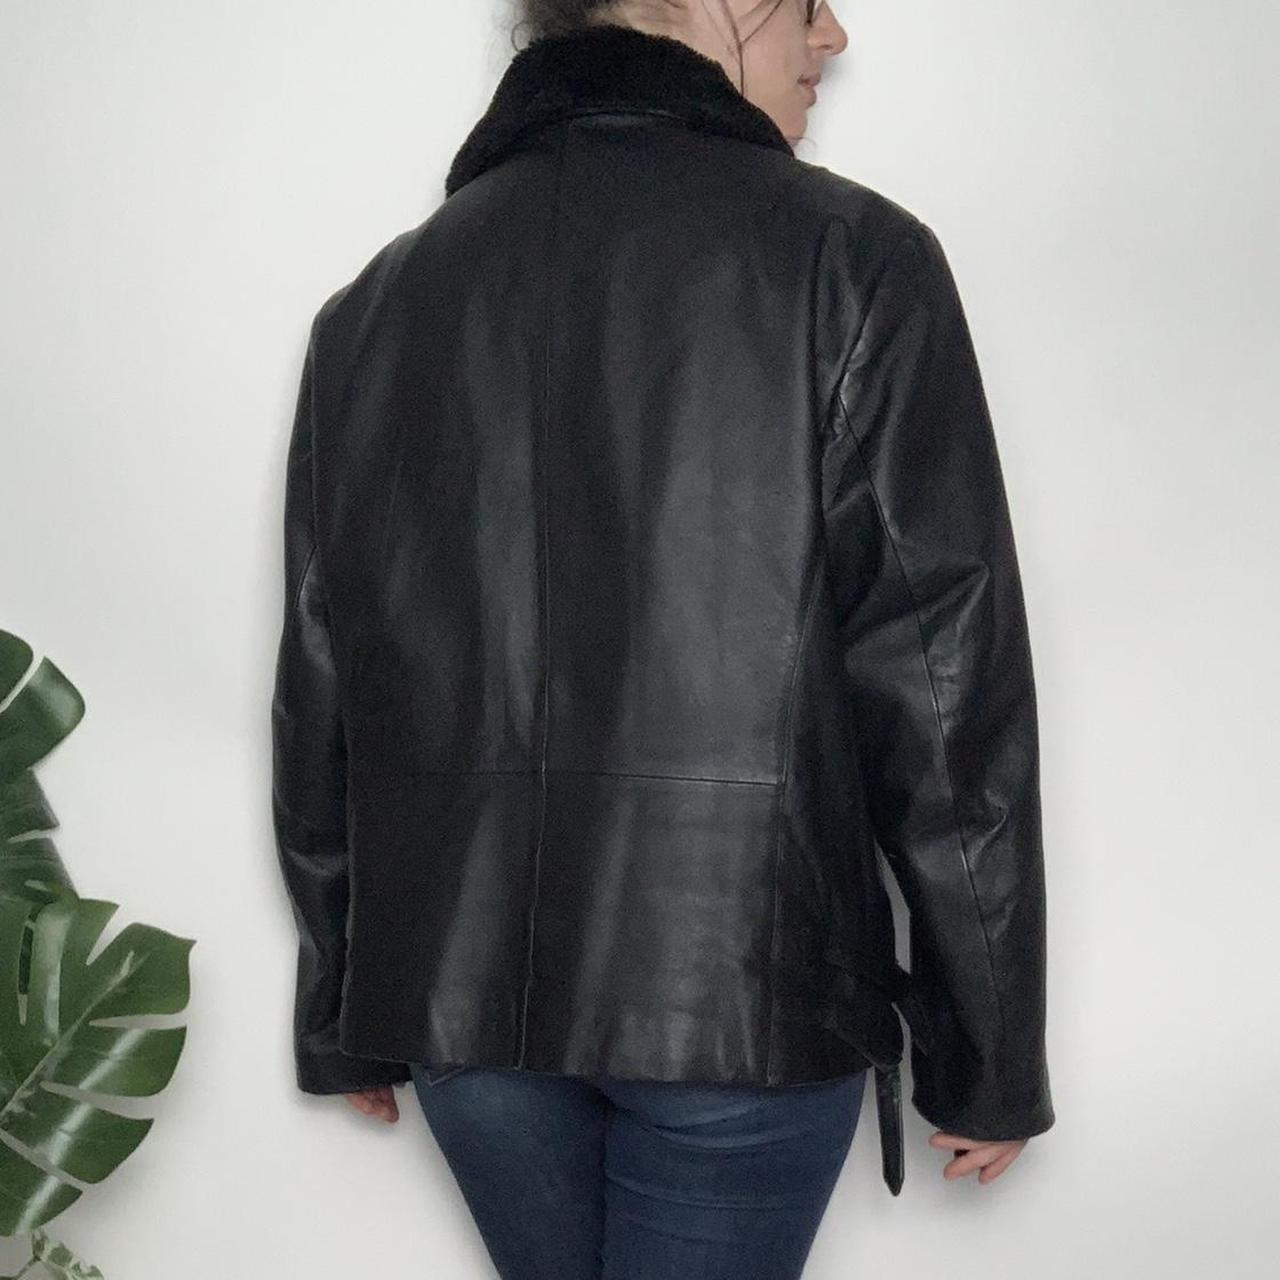 Vintage 90s genuine leather motorcycle jacket with removable collar